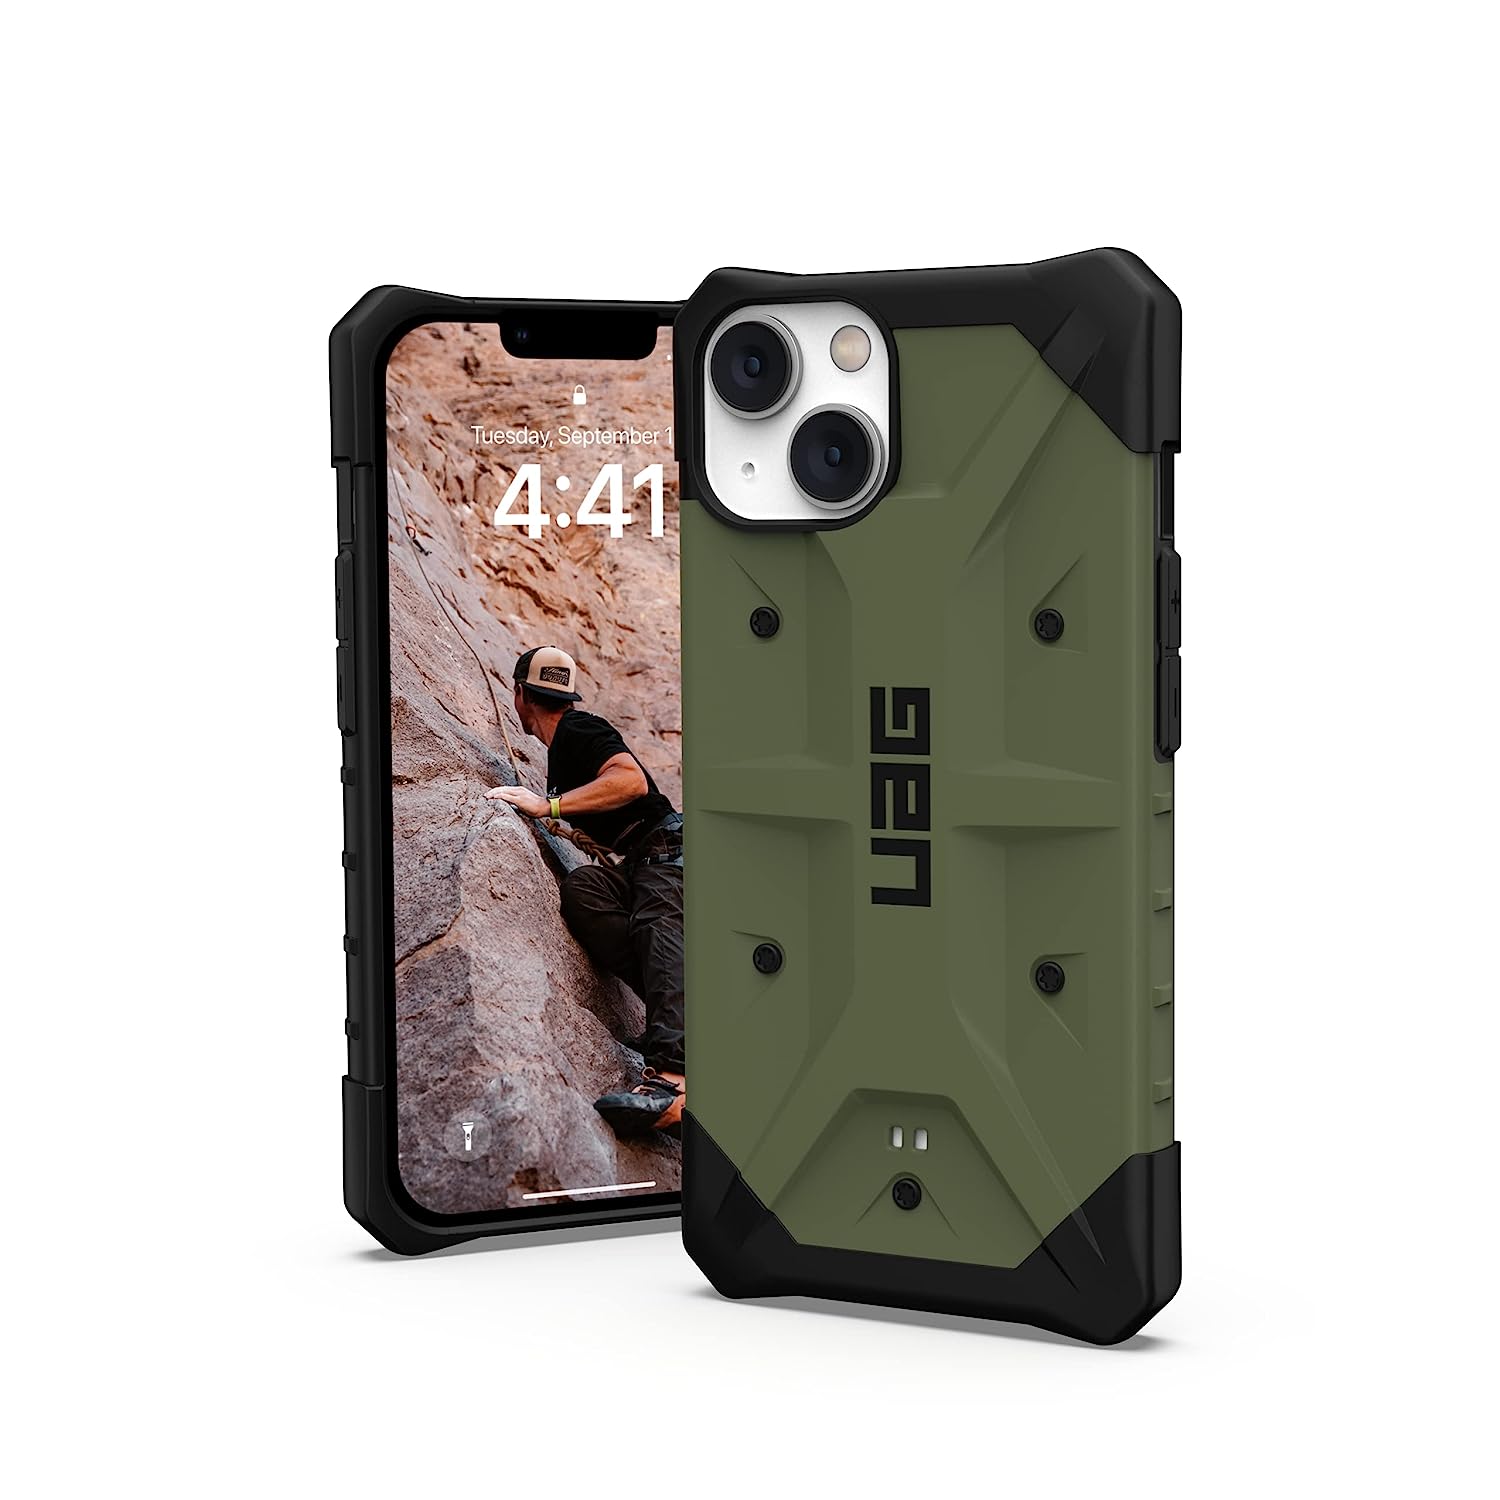 iPhone 14 Armor Cover | Original Urban Armor Slim Fit Rugged Protective Case/Cover Designed For Apple iPhone 14 UAG Olive